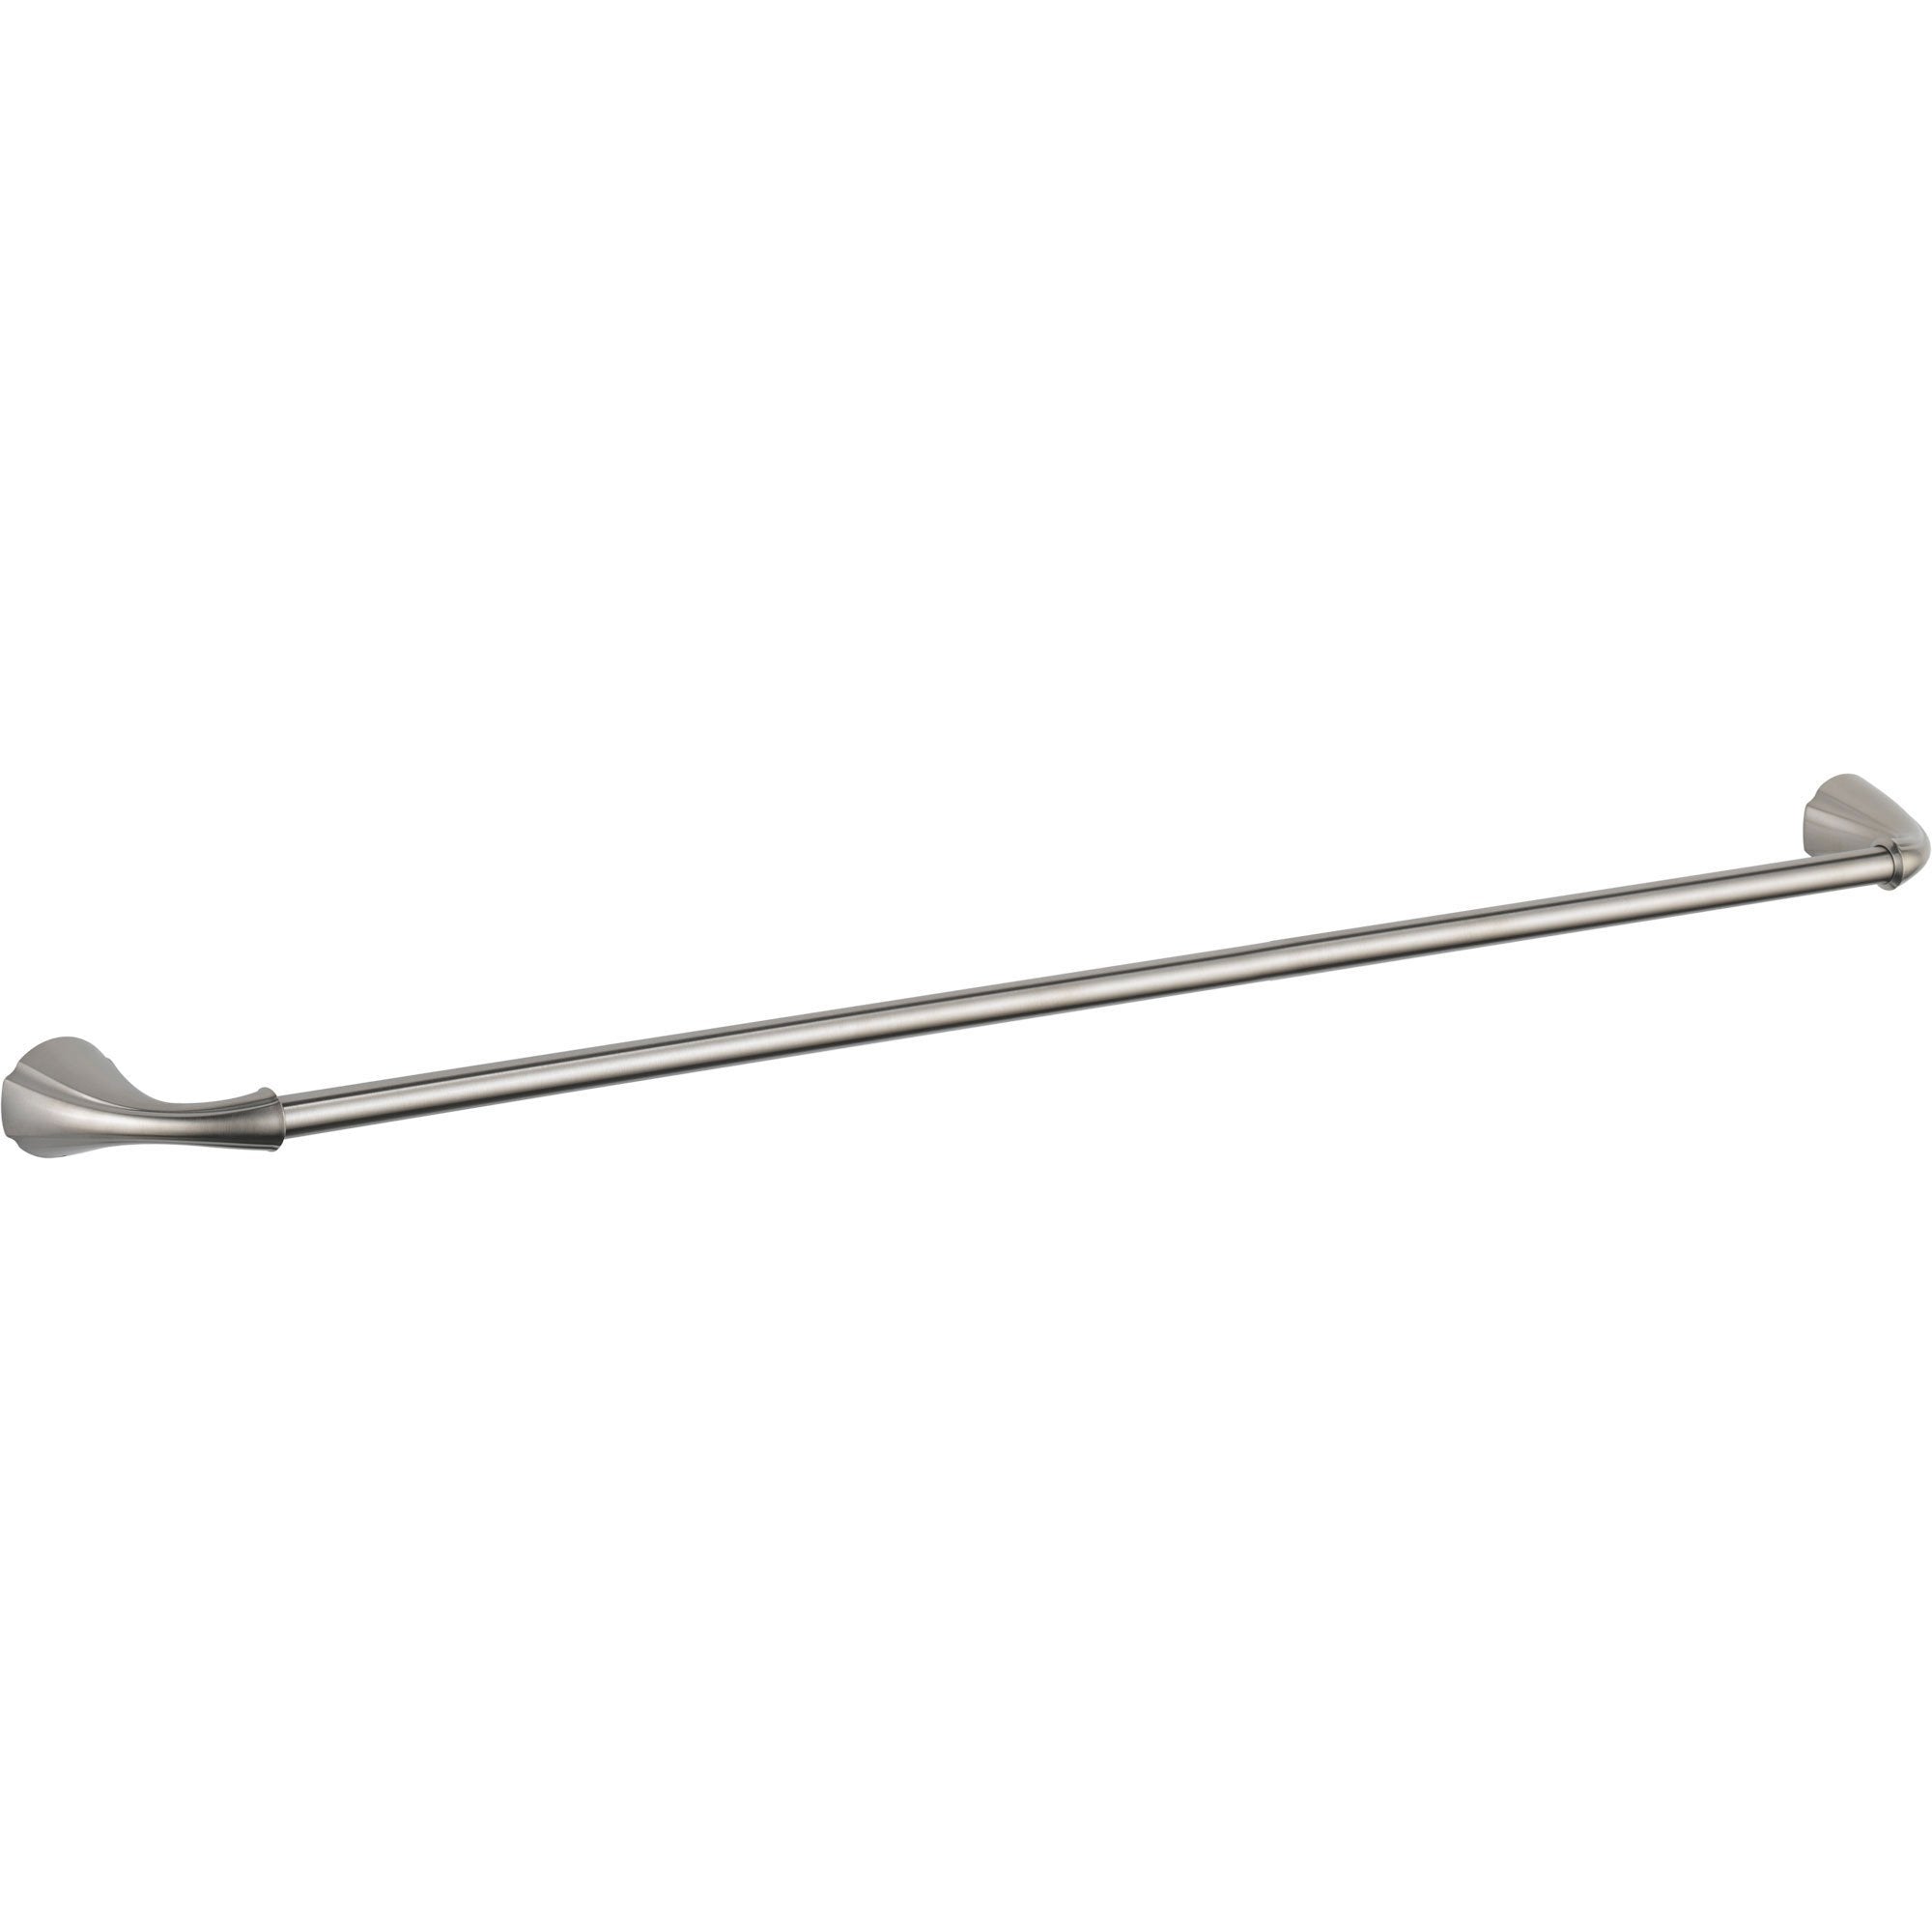 Delta Addison Collection Stainless Steel Finish 30 inch Single Towel Bar 638894